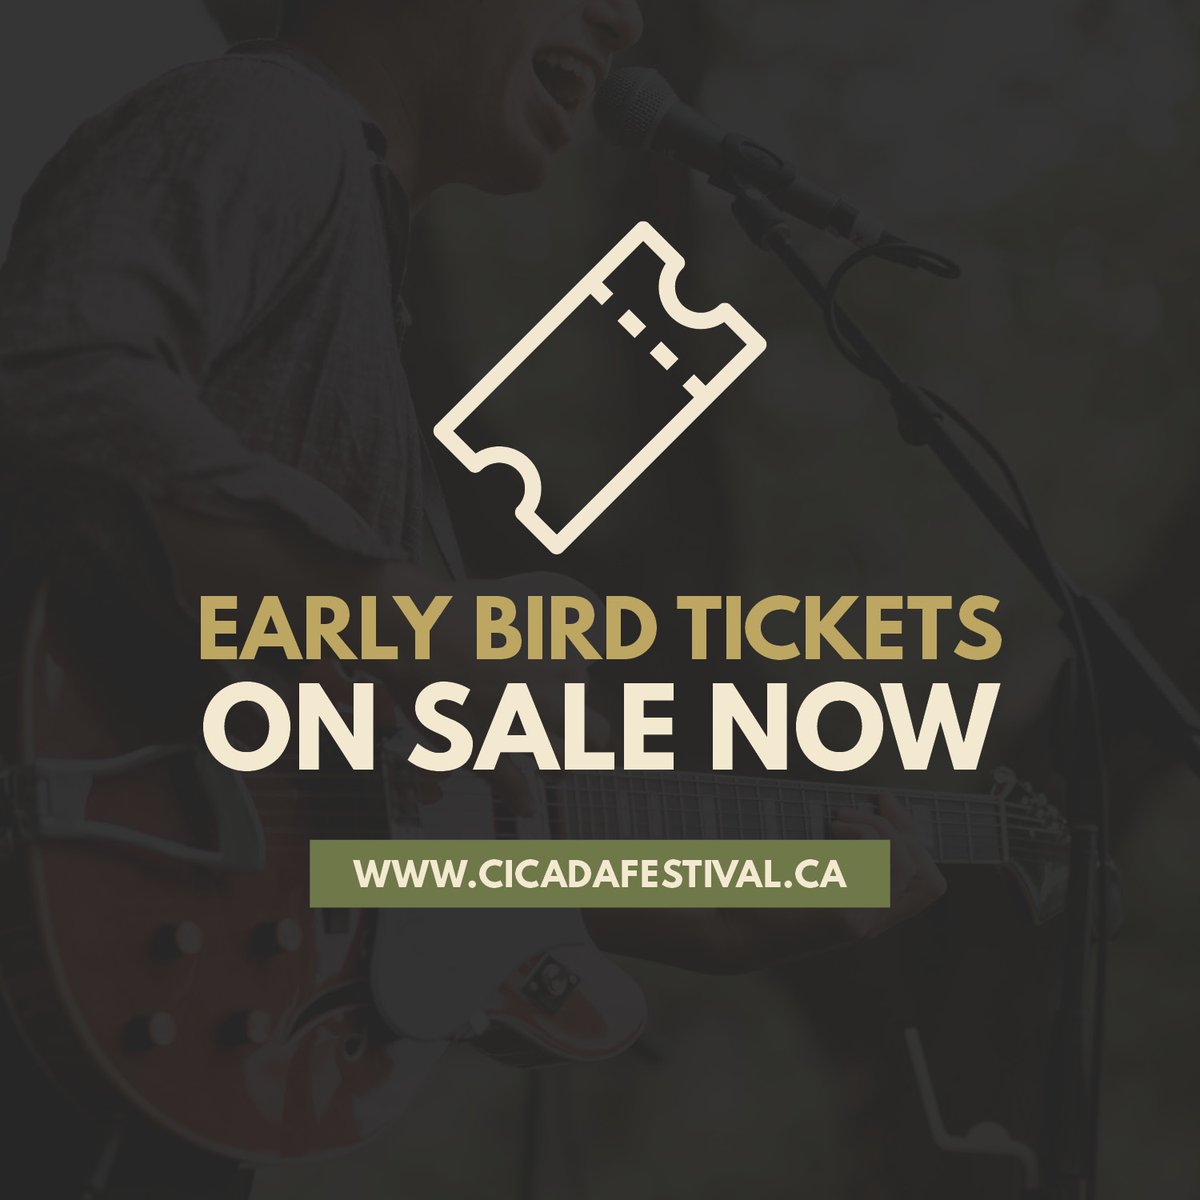 In case you missed it, our #Cicada2023 lineup was announced yesterday, including @JulyTalk @TheSheepdogs @SloanMusic @JJWildeChild & many more! Full lineup: cicadafestival.ca Early bird tickets on sale now: bit.ly/cicada-2023